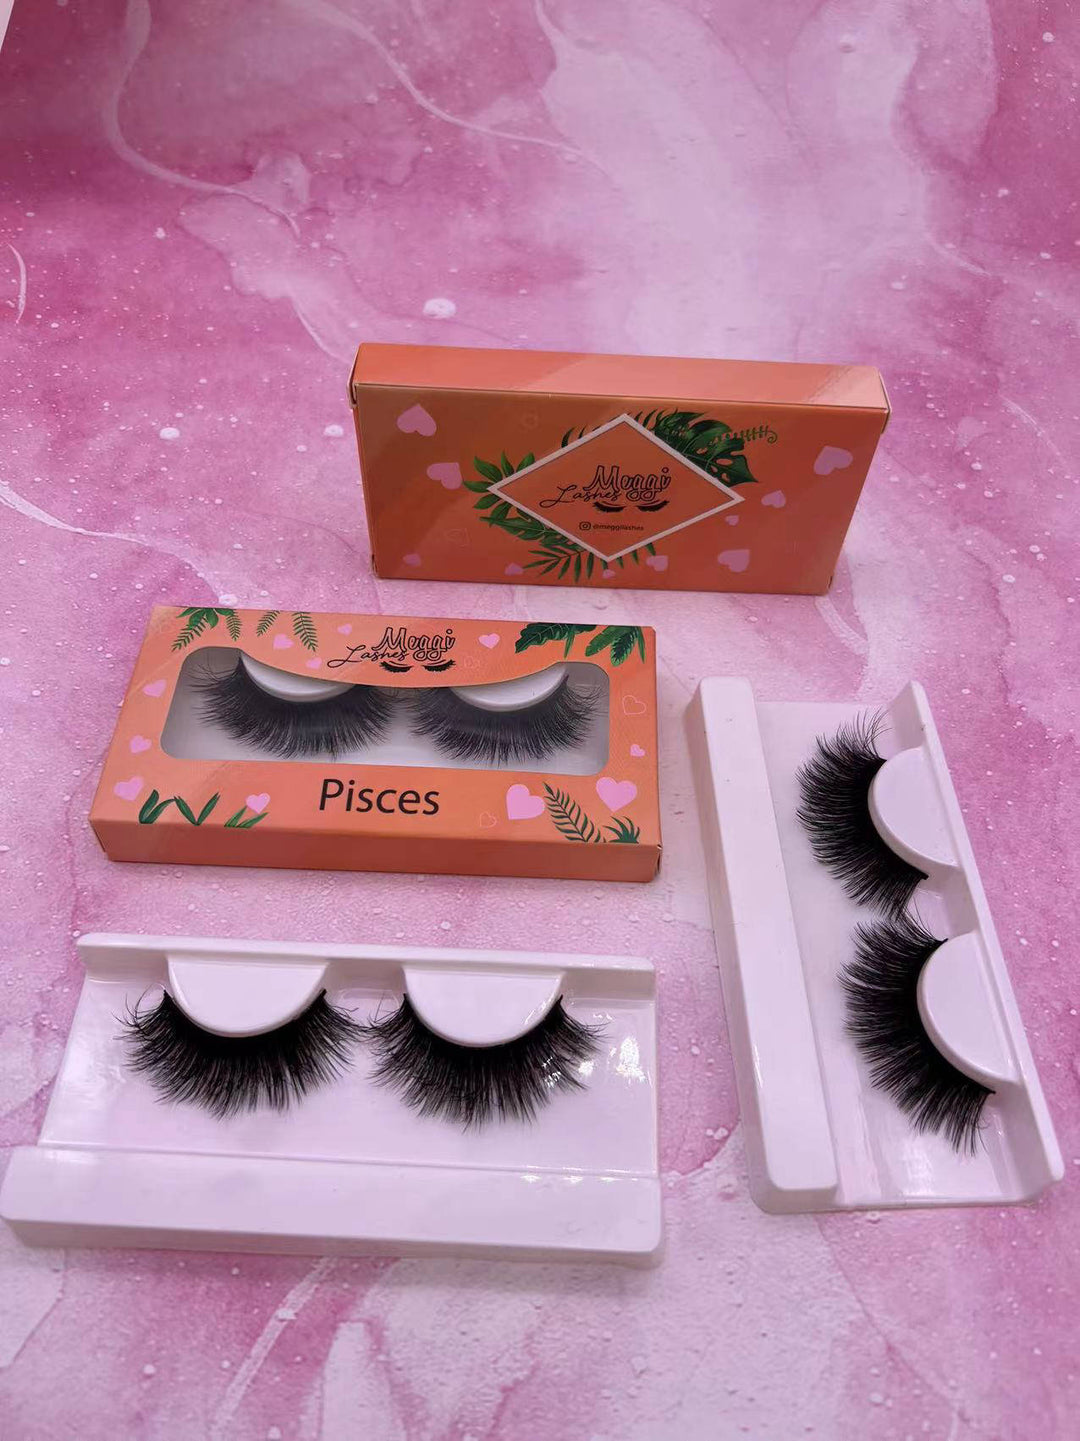 Pisces Lash (Amber collection)